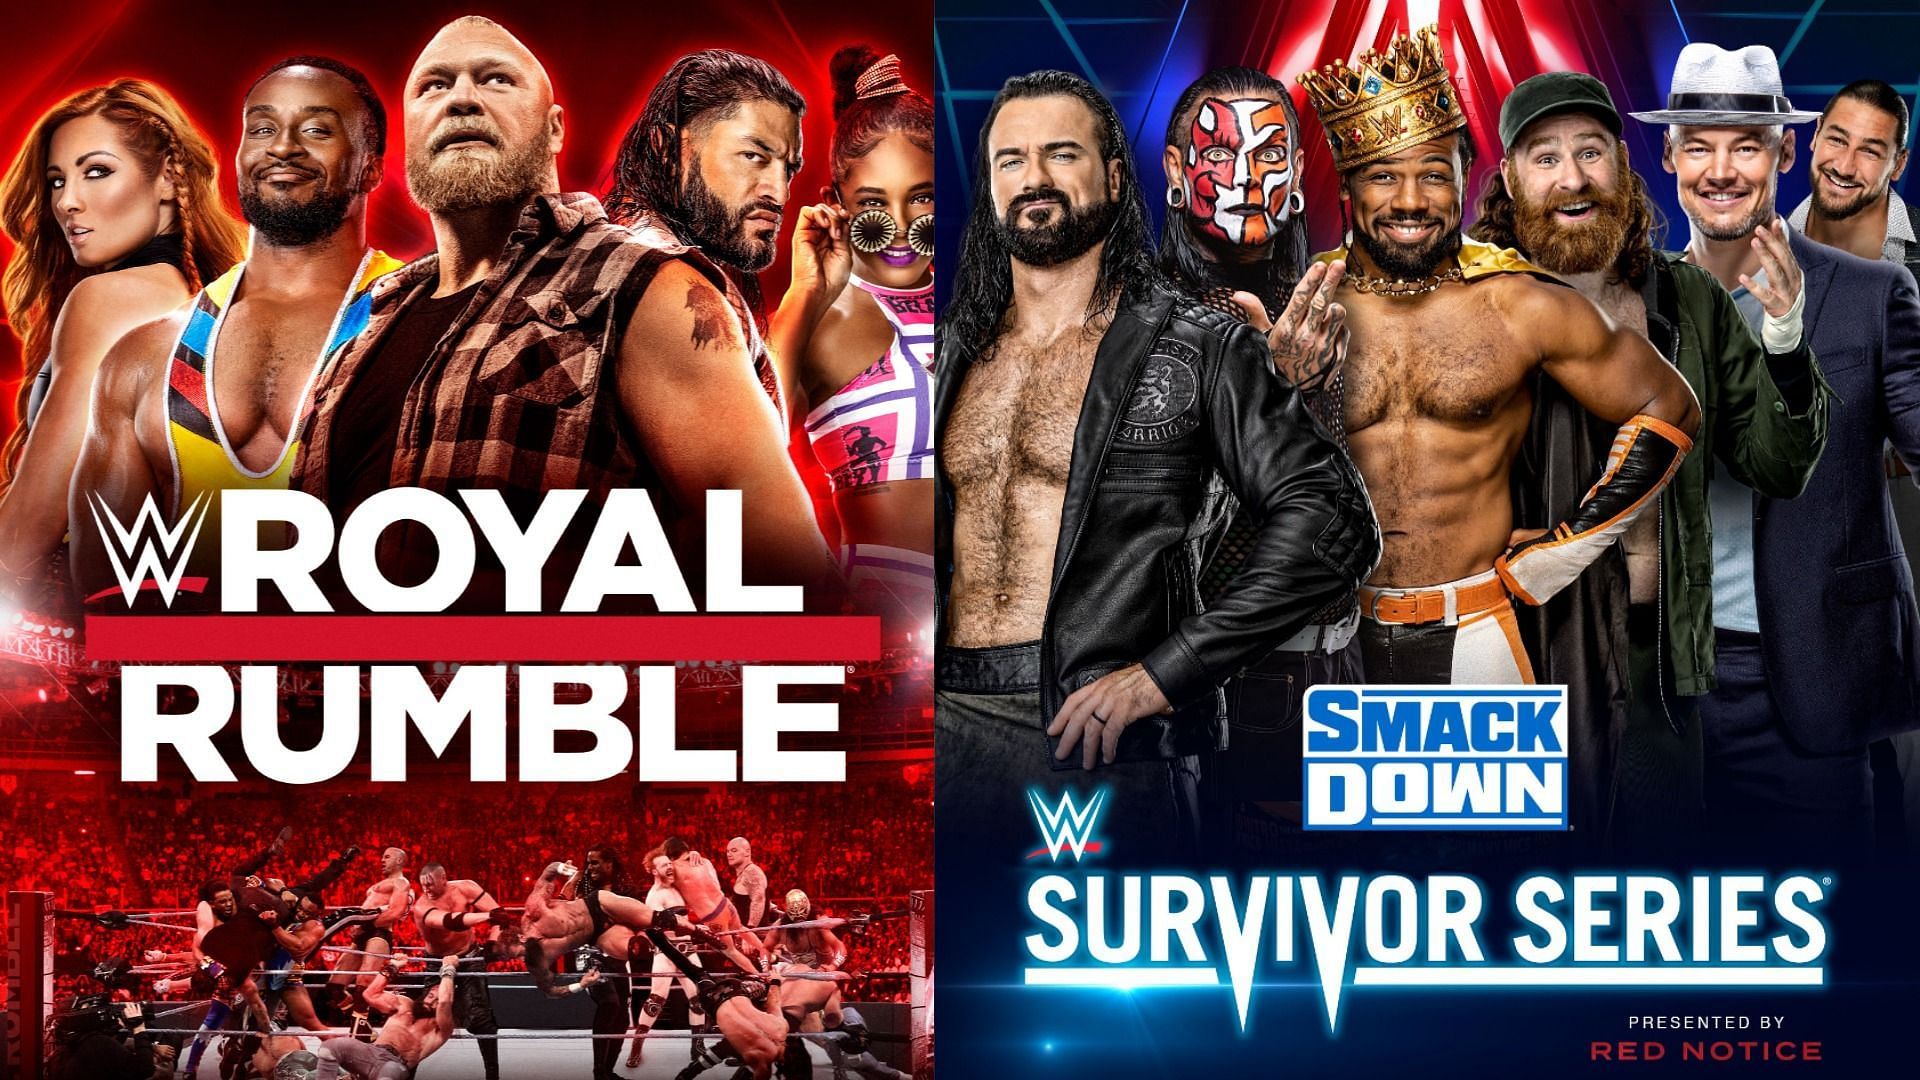 Adding this stipulation could make Survivor Series a lot more interesting